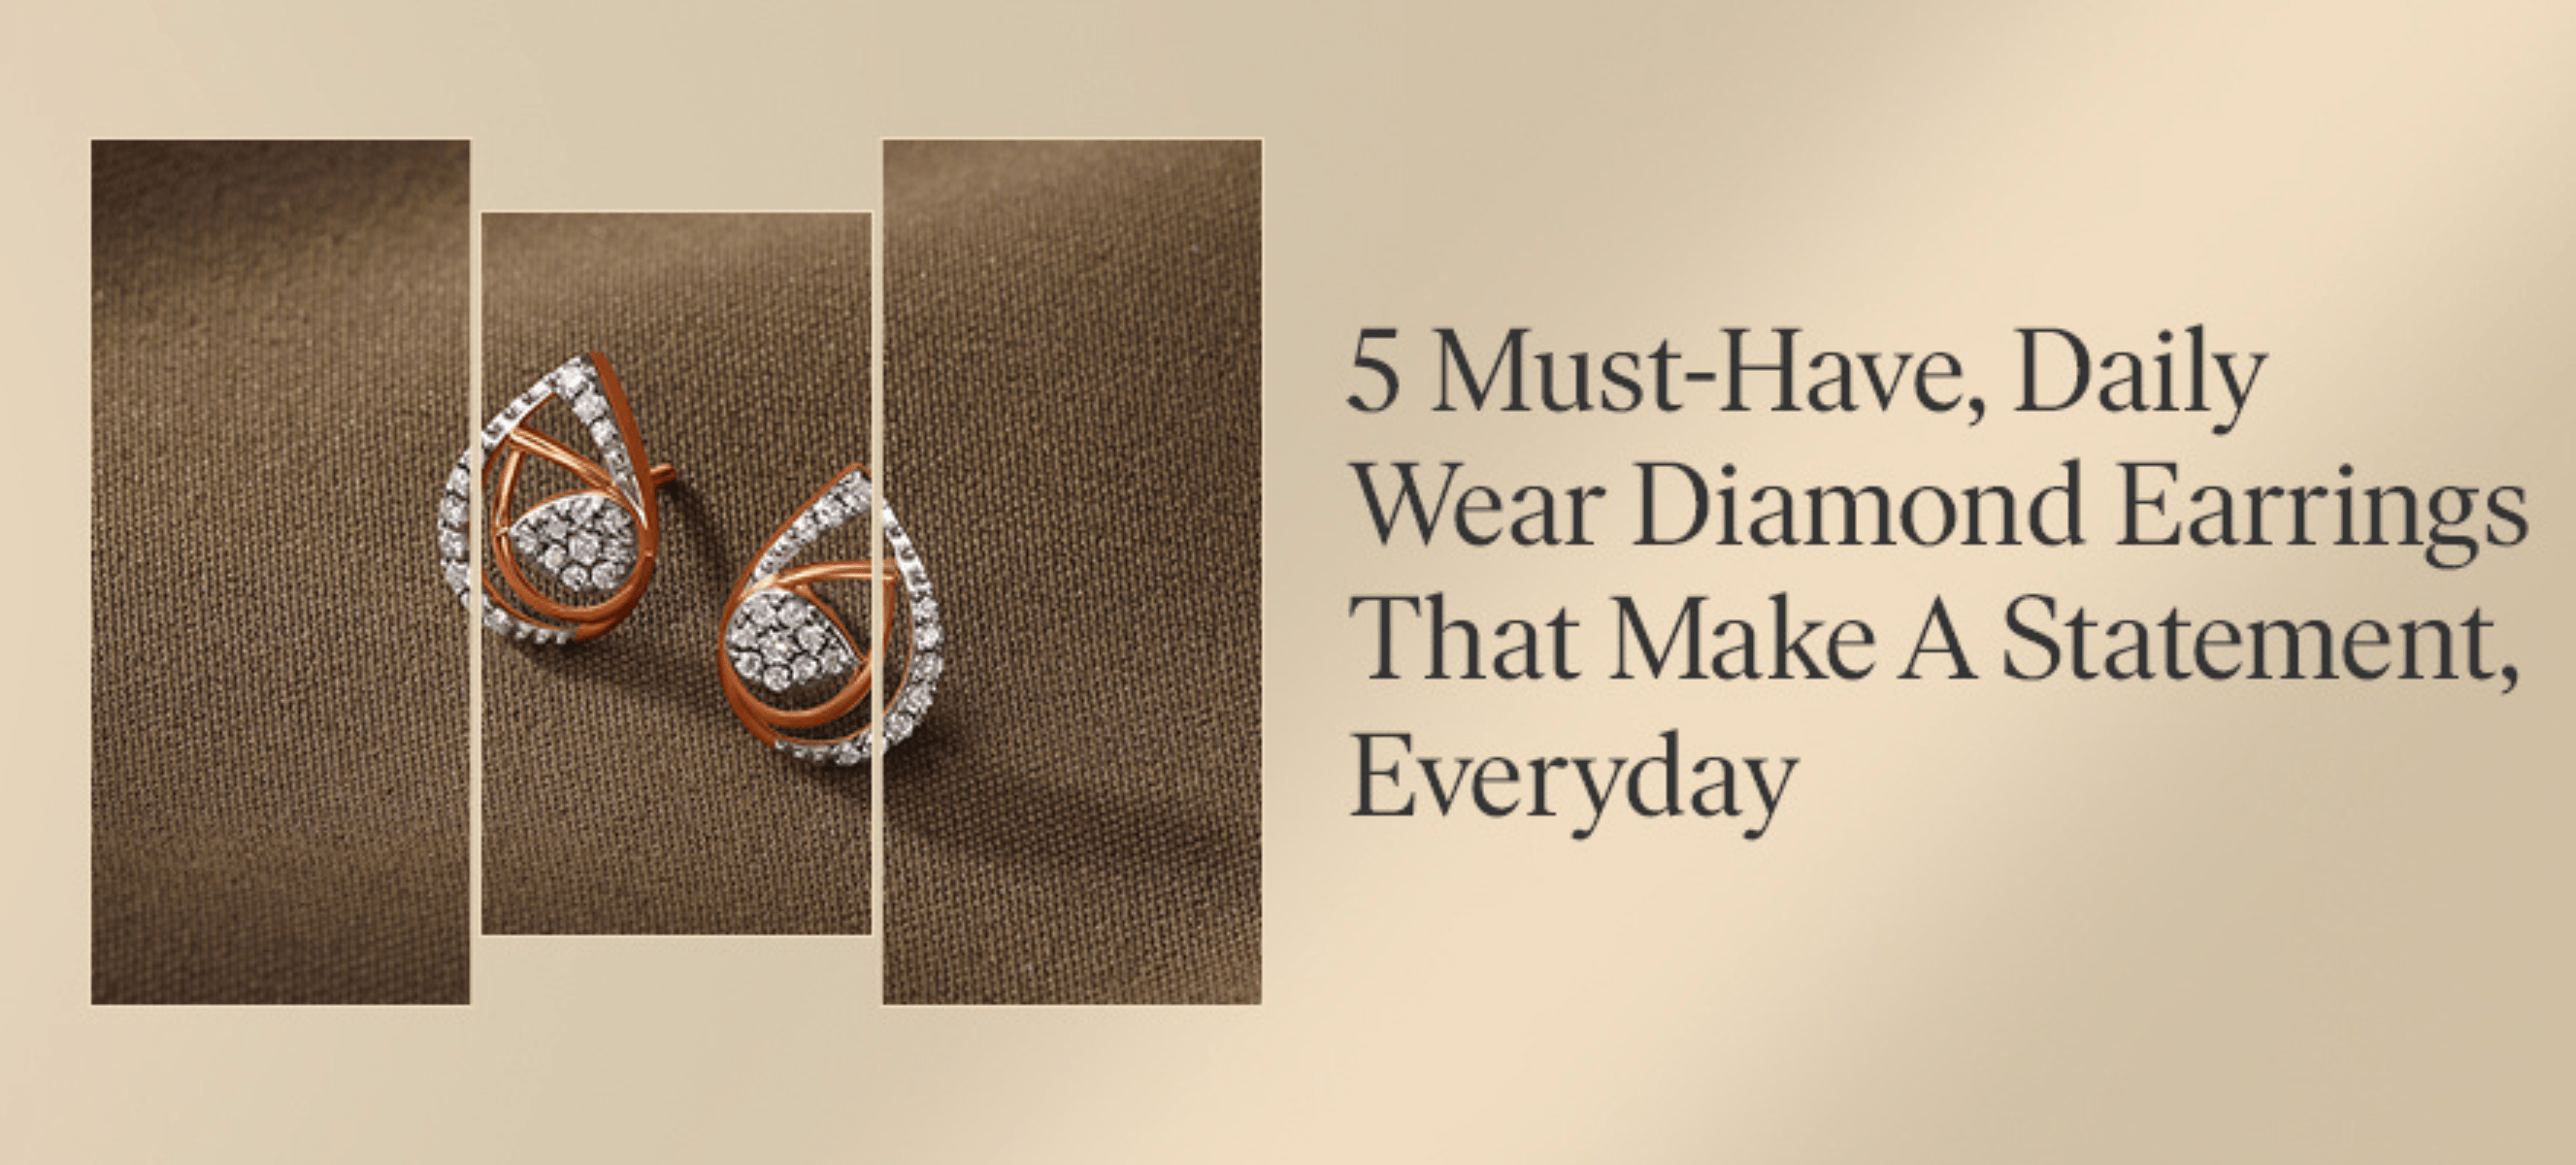 5 Must-Have, Daily Wear Diamond Earrings That Make A Statement ...